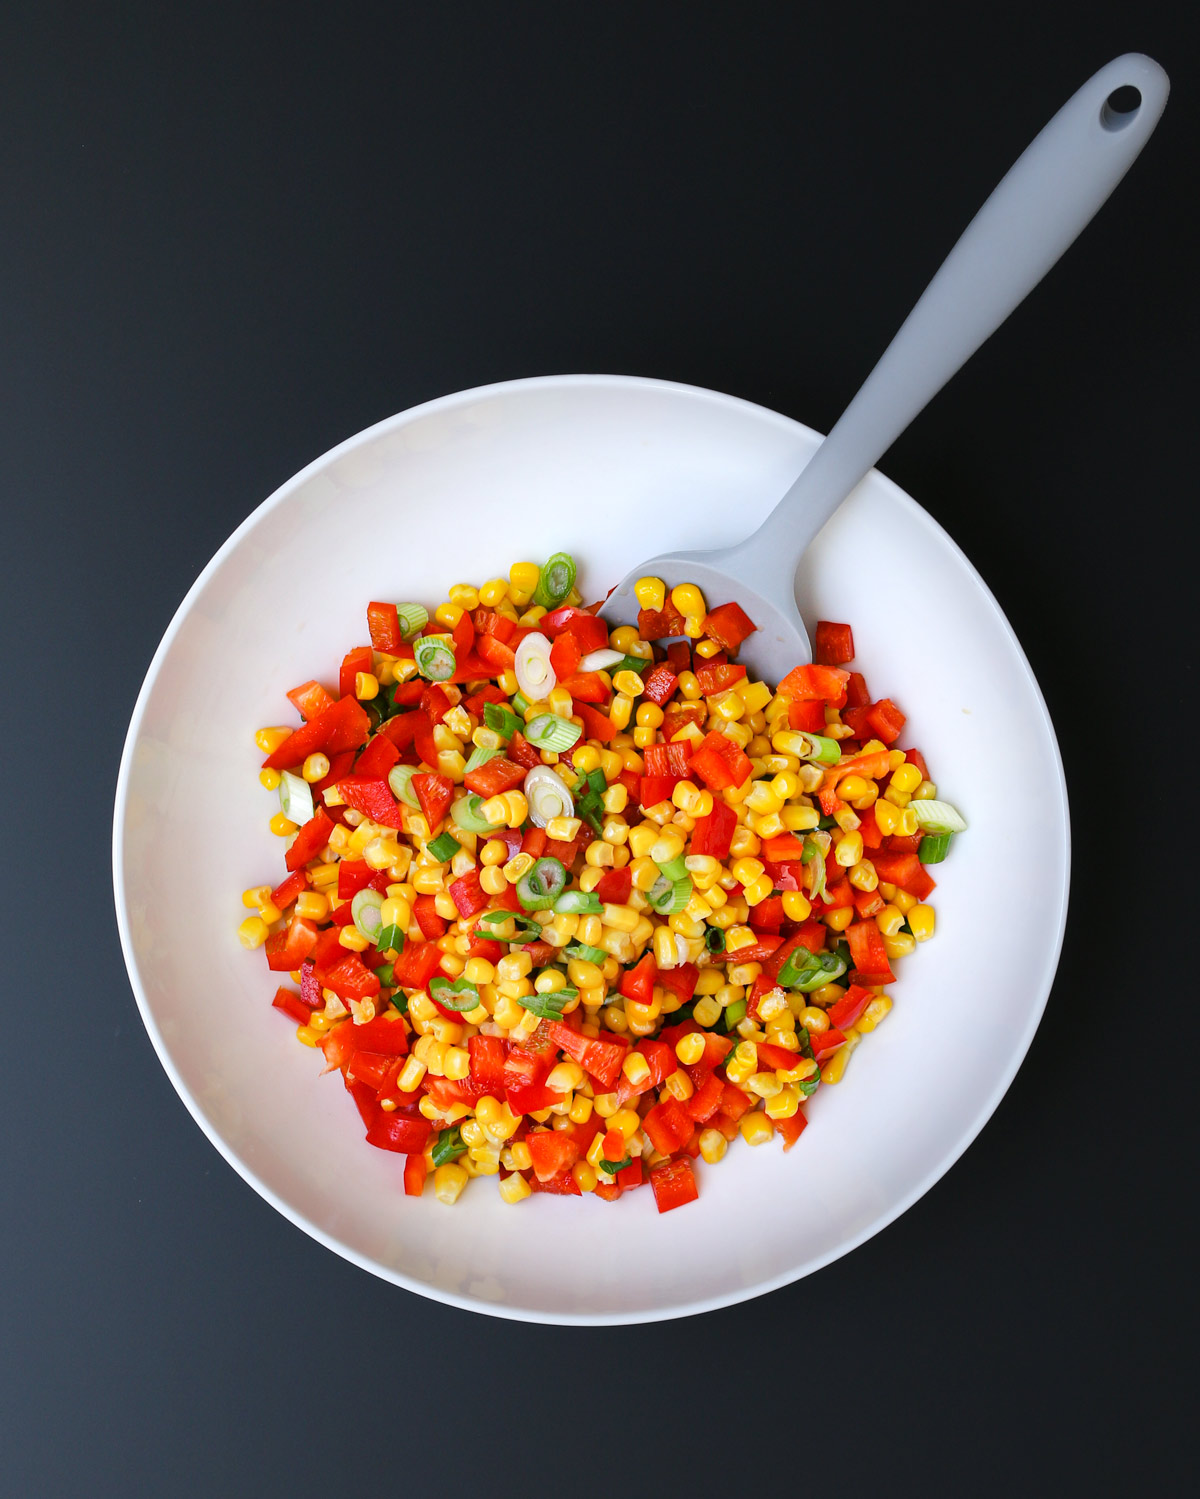 gray spatula submerged into the mixture of vegetables in the bowl.